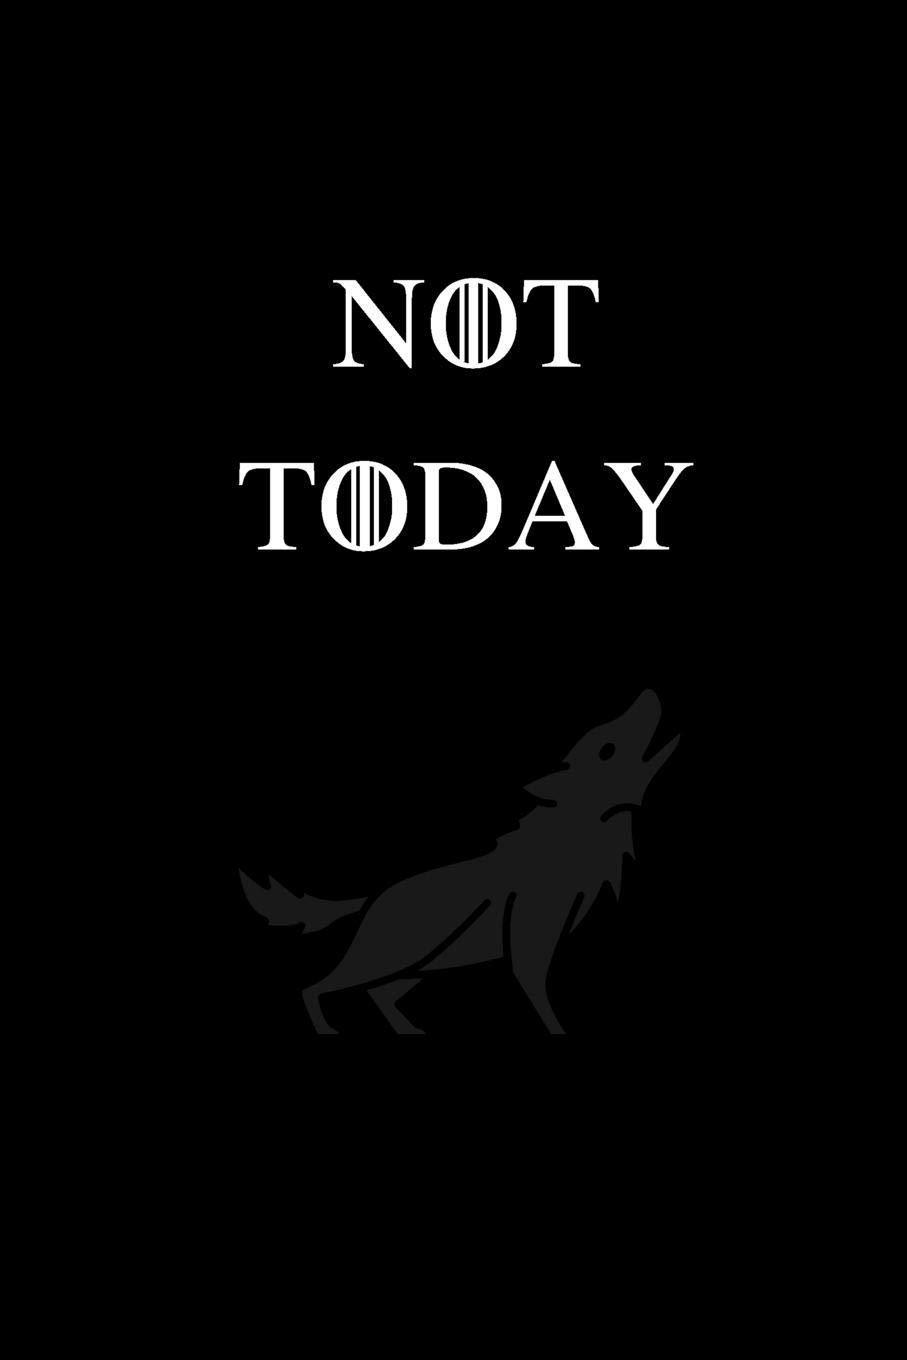 Not Today: No.4 Game of Thrones Quote By Arya Stark